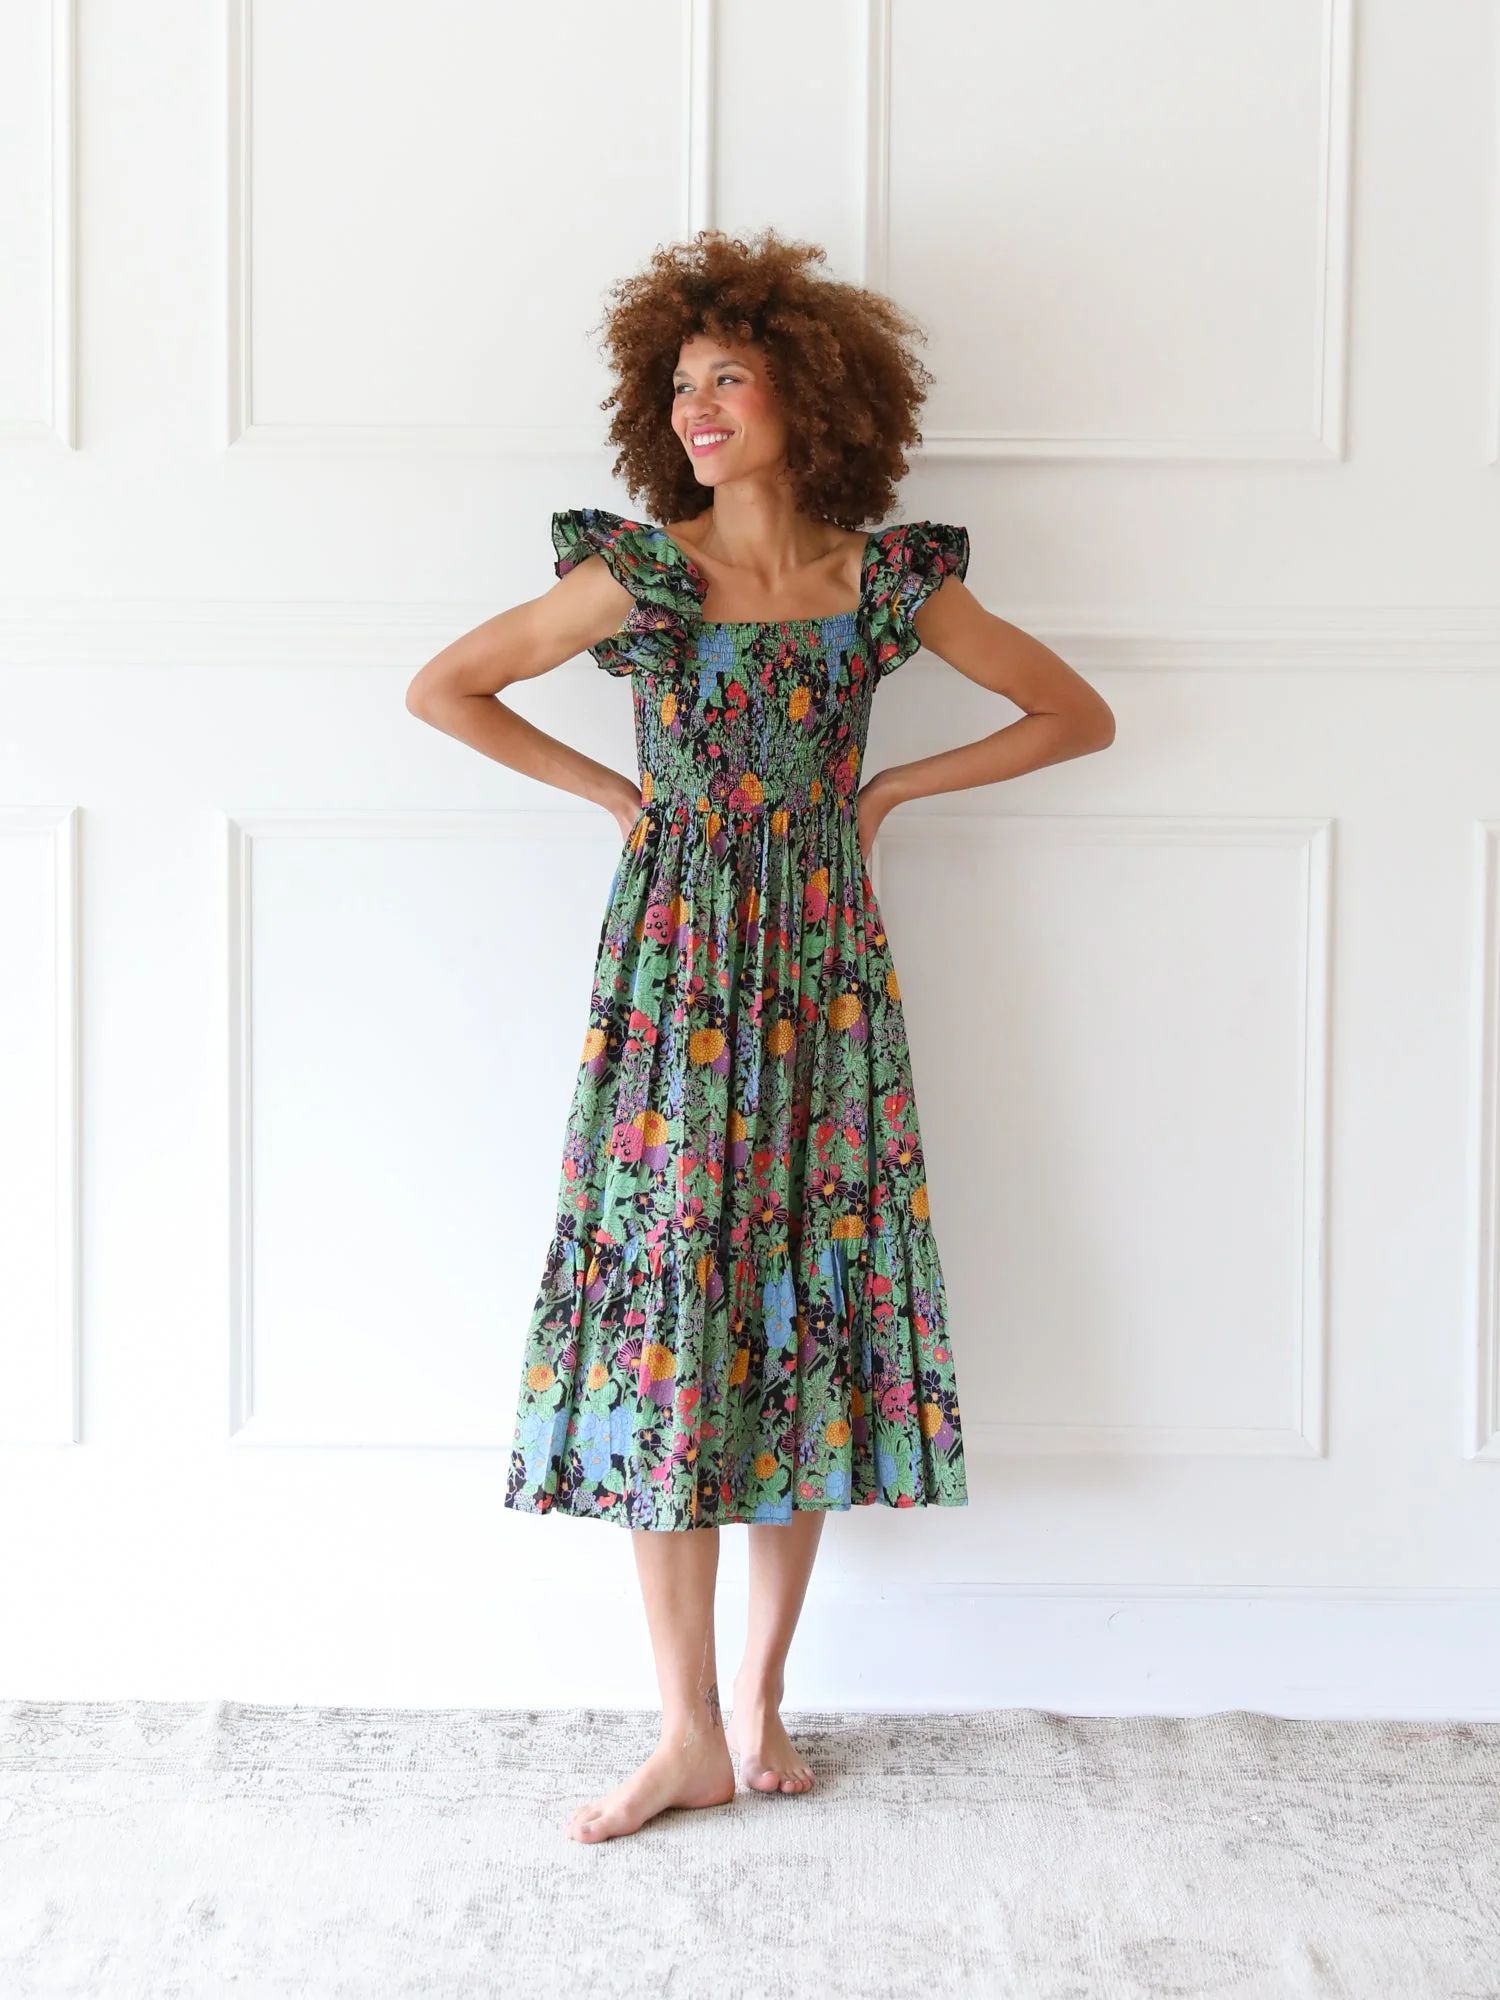 Shop Mille - Olympia Dress in Botanica | Mille